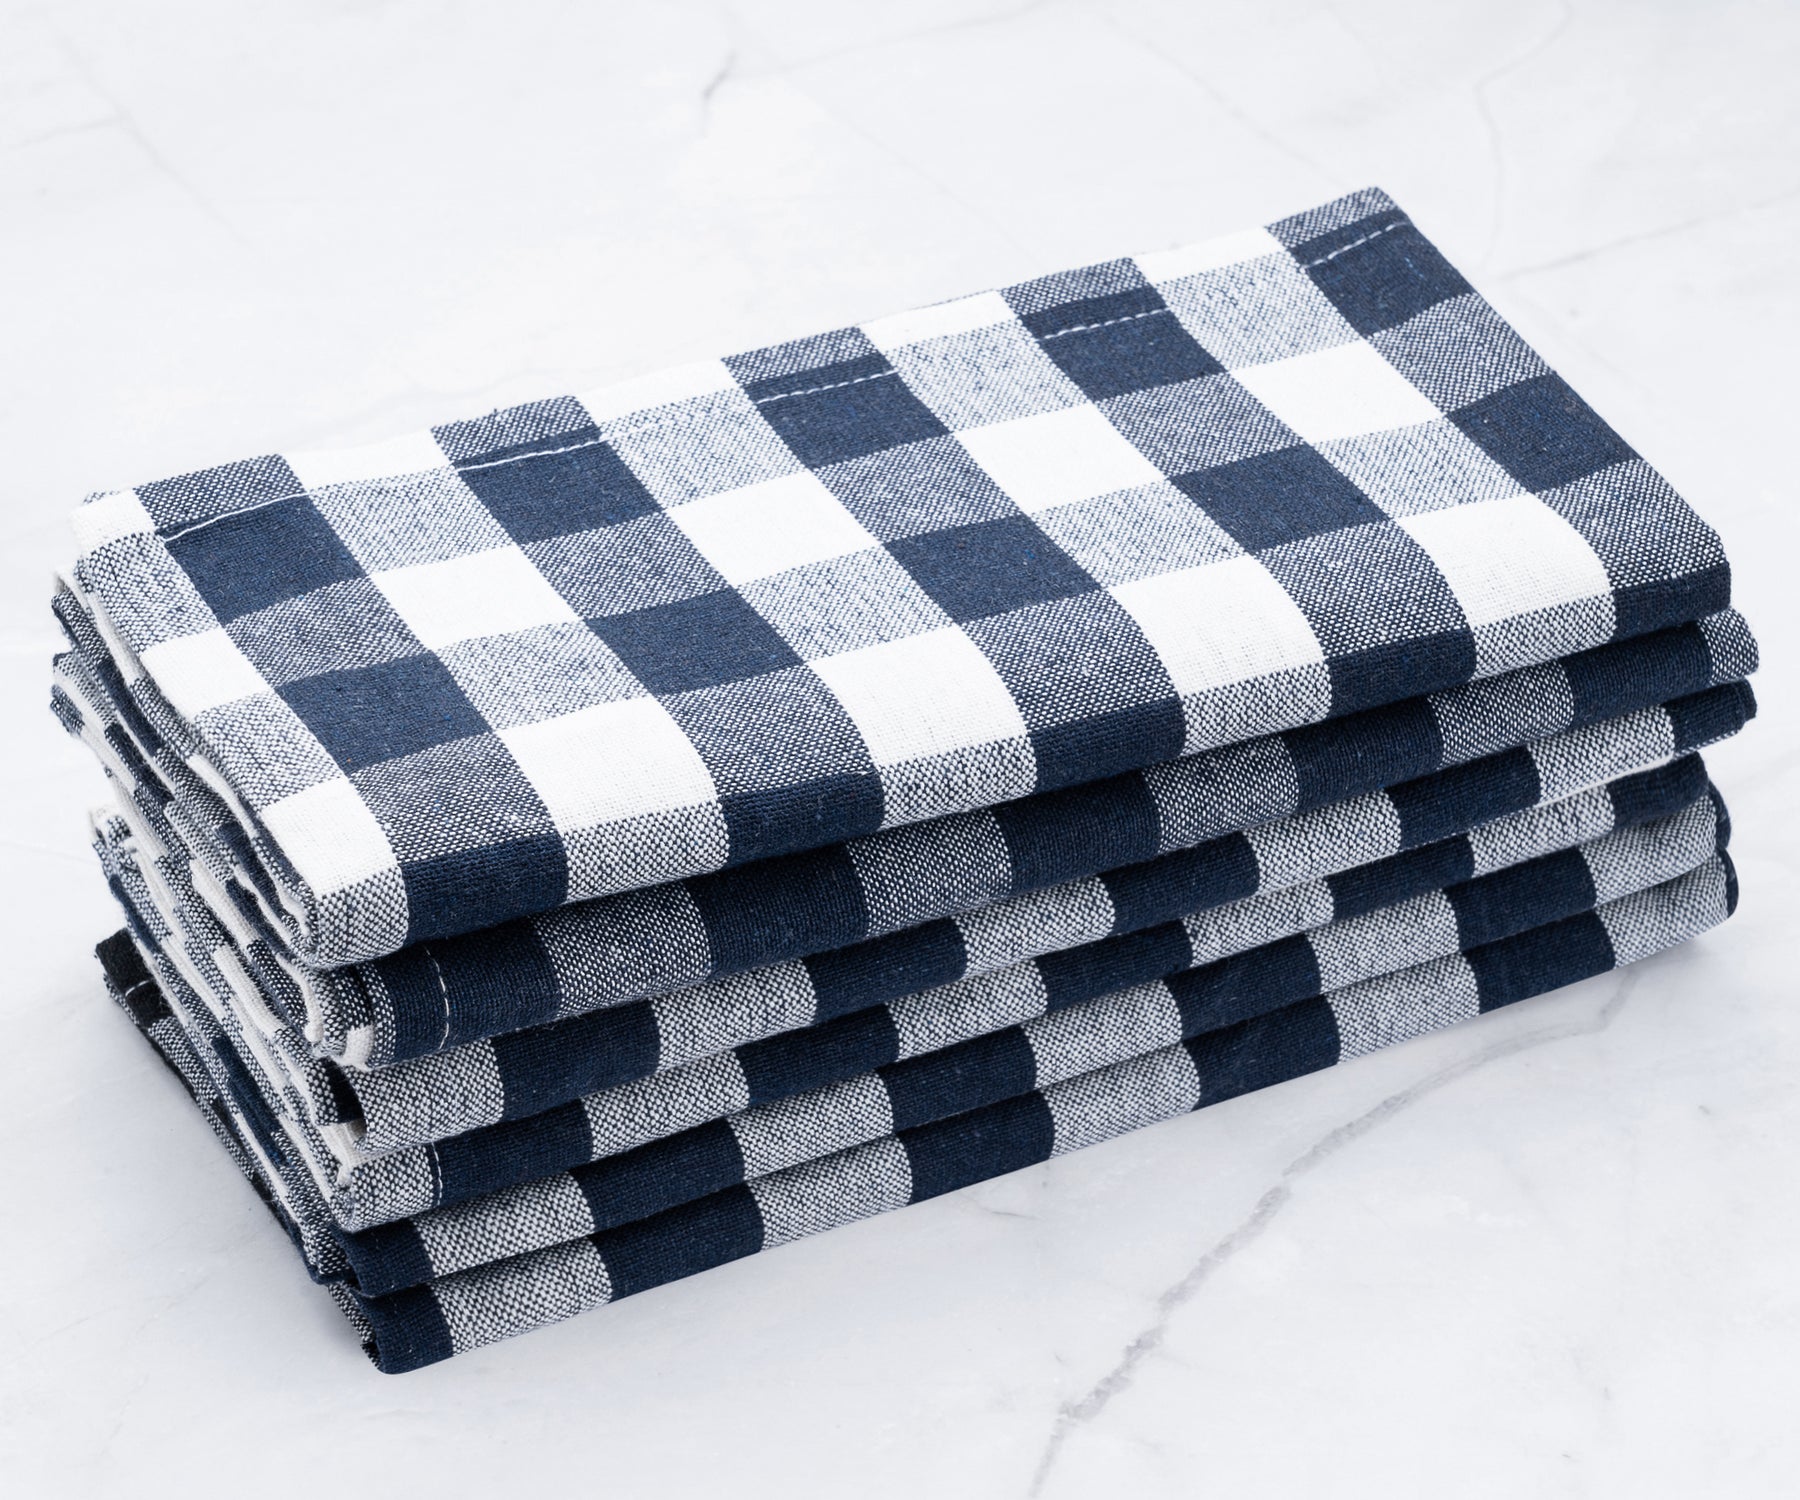 Premium blue cotton napkins in various colors and designs for versatile use.